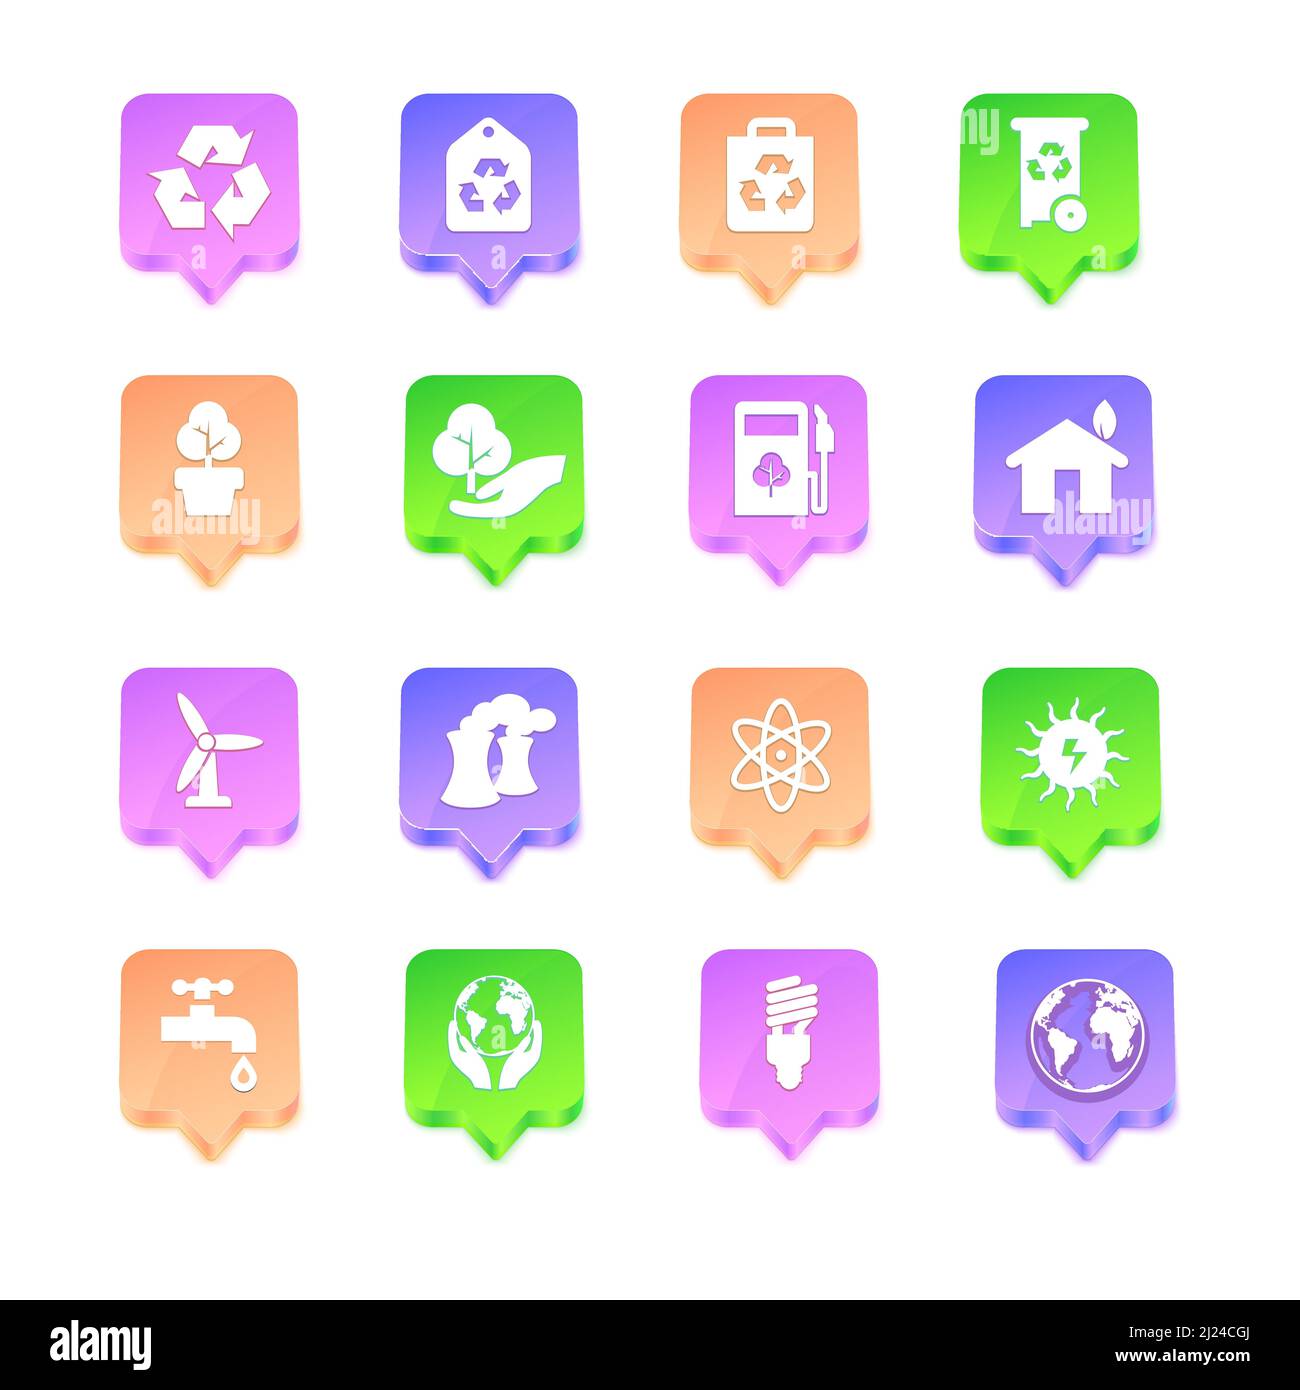 Set of ecological icons. Stock Vector